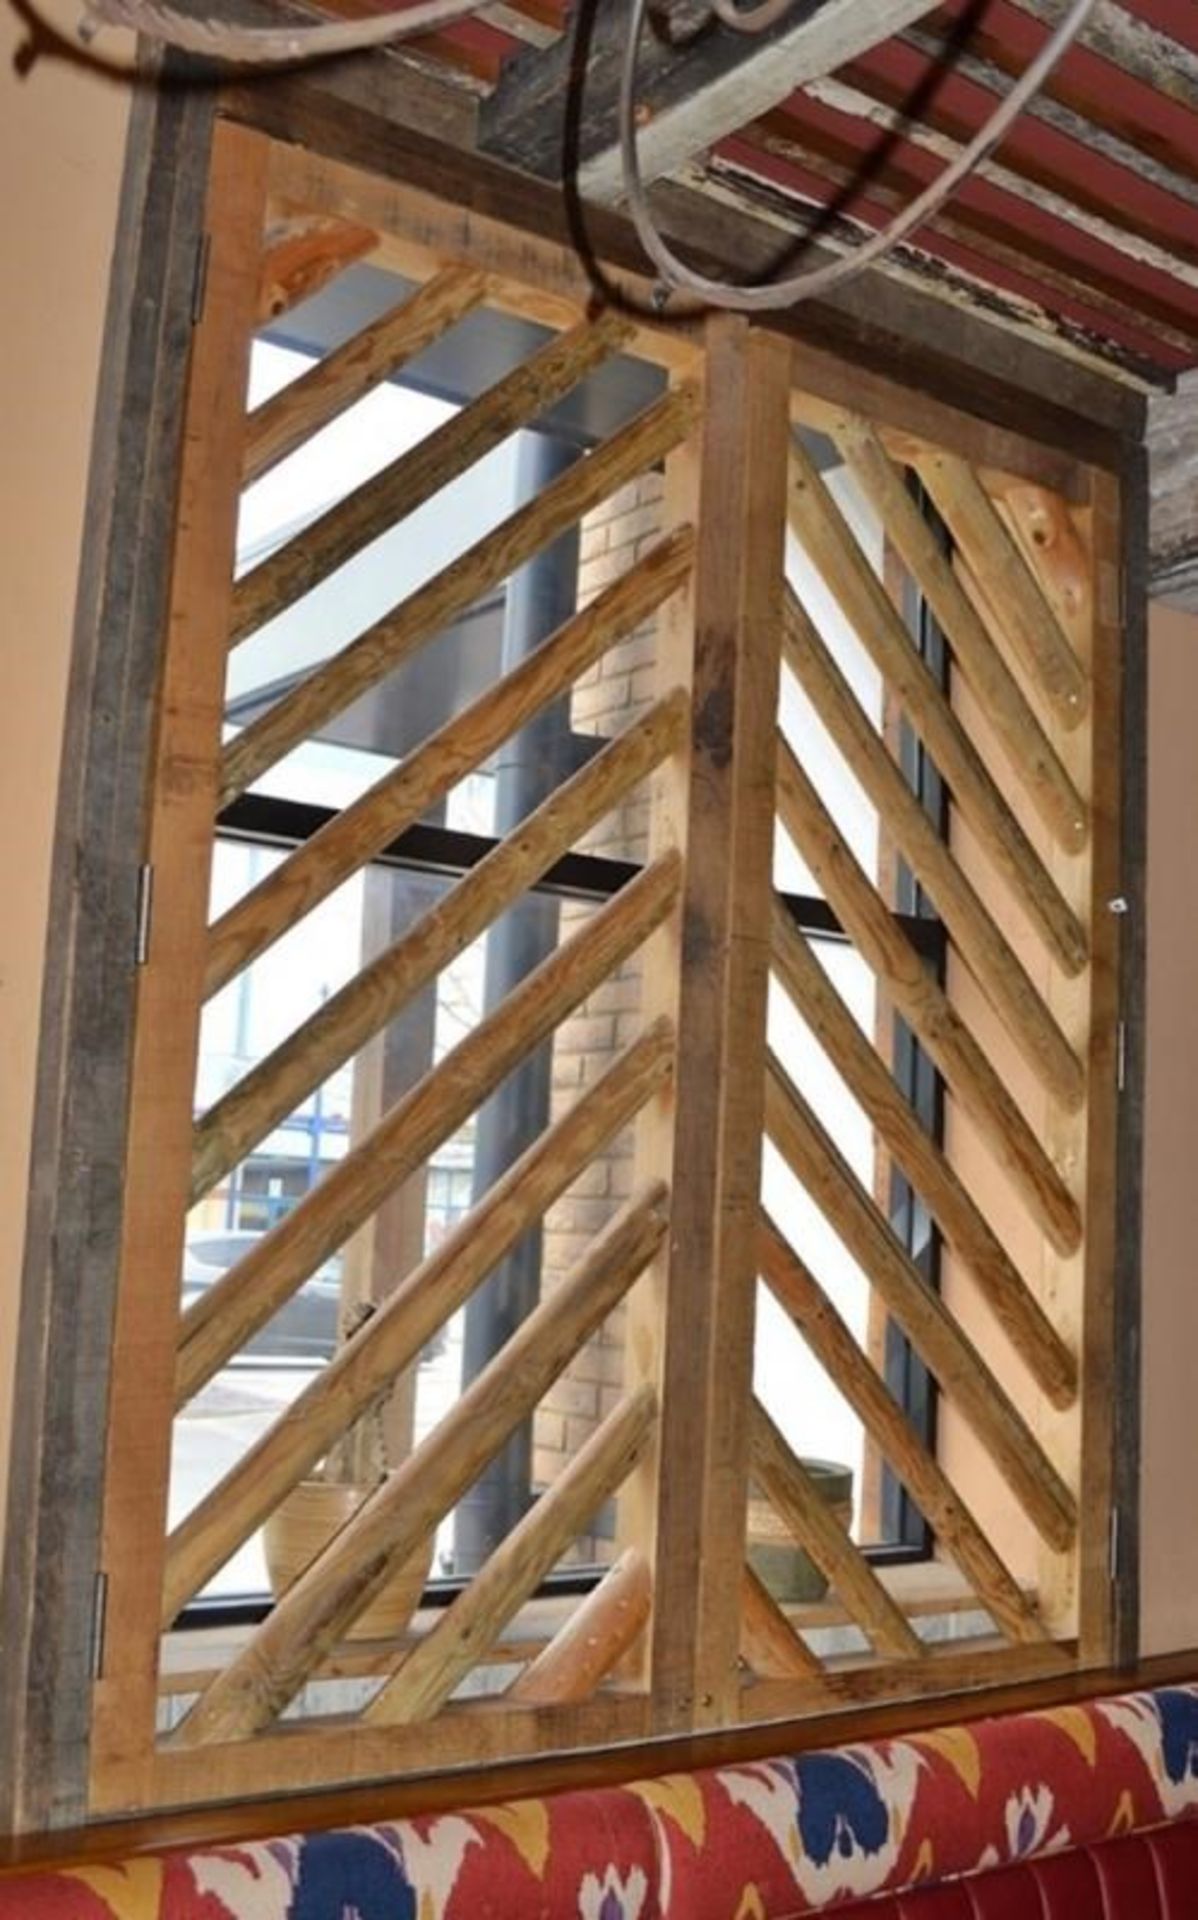 4 x Wooden Timber Window Shutters - Each Shutter Features Two Timber Frames With Round Wood - Image 3 of 5